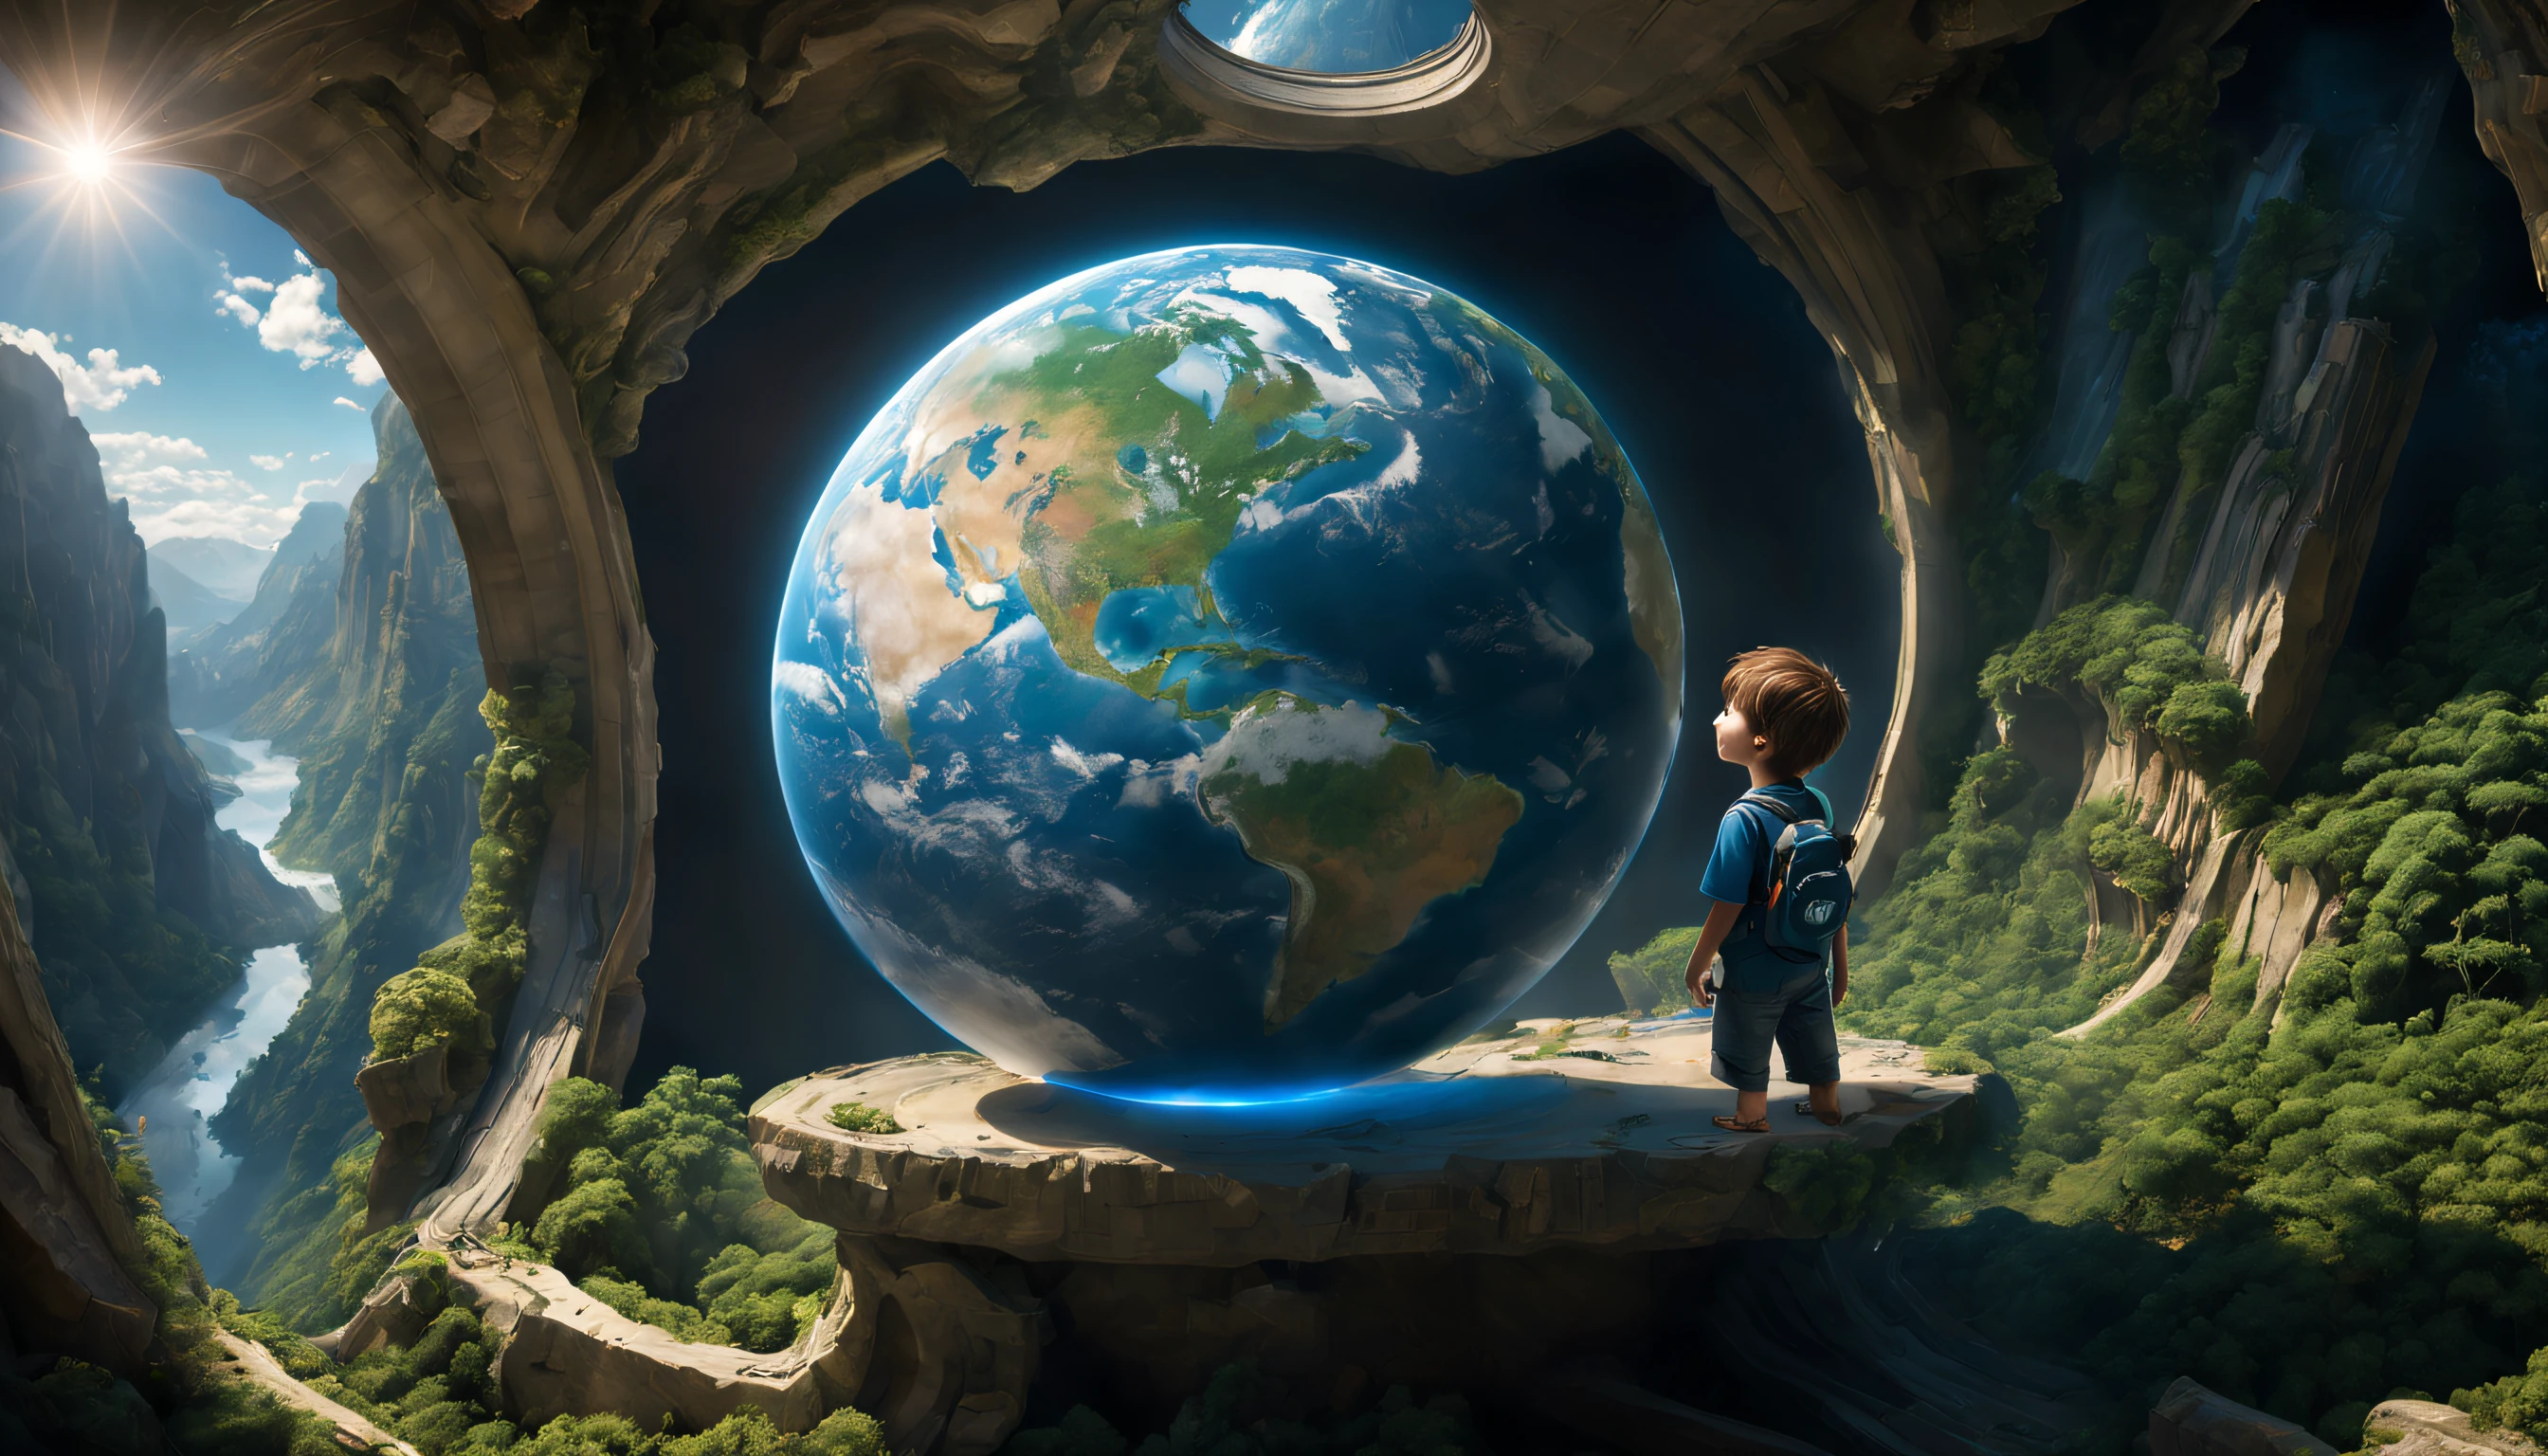 (A boy: 0.8), (the earth:1.4), (best quality,4k,8k,highres,masterpiece:1.2), (ultra-detailed), (realistic,photorealistic,photo-realistic:1.37), (HDR), (vivid colors), (sharp focight sunlight), (young boy), (globe), (blue planet), (normal clothes), ((mortar board)), (floating), (spacecraft), (curiosity), (wonder), (earth's atmosphere), (endless universe), (ethereal), (unexplored territory), (limitless potential), (crystal clear view), (rivers and mountains), (lush green vegetation), (pristine nature), (peaceful), (surreal), (awe-inspirinagical), (adventure), (discovery), (journey into the unknown), (boy's dream), (hand touch the world), (amazing perspective)